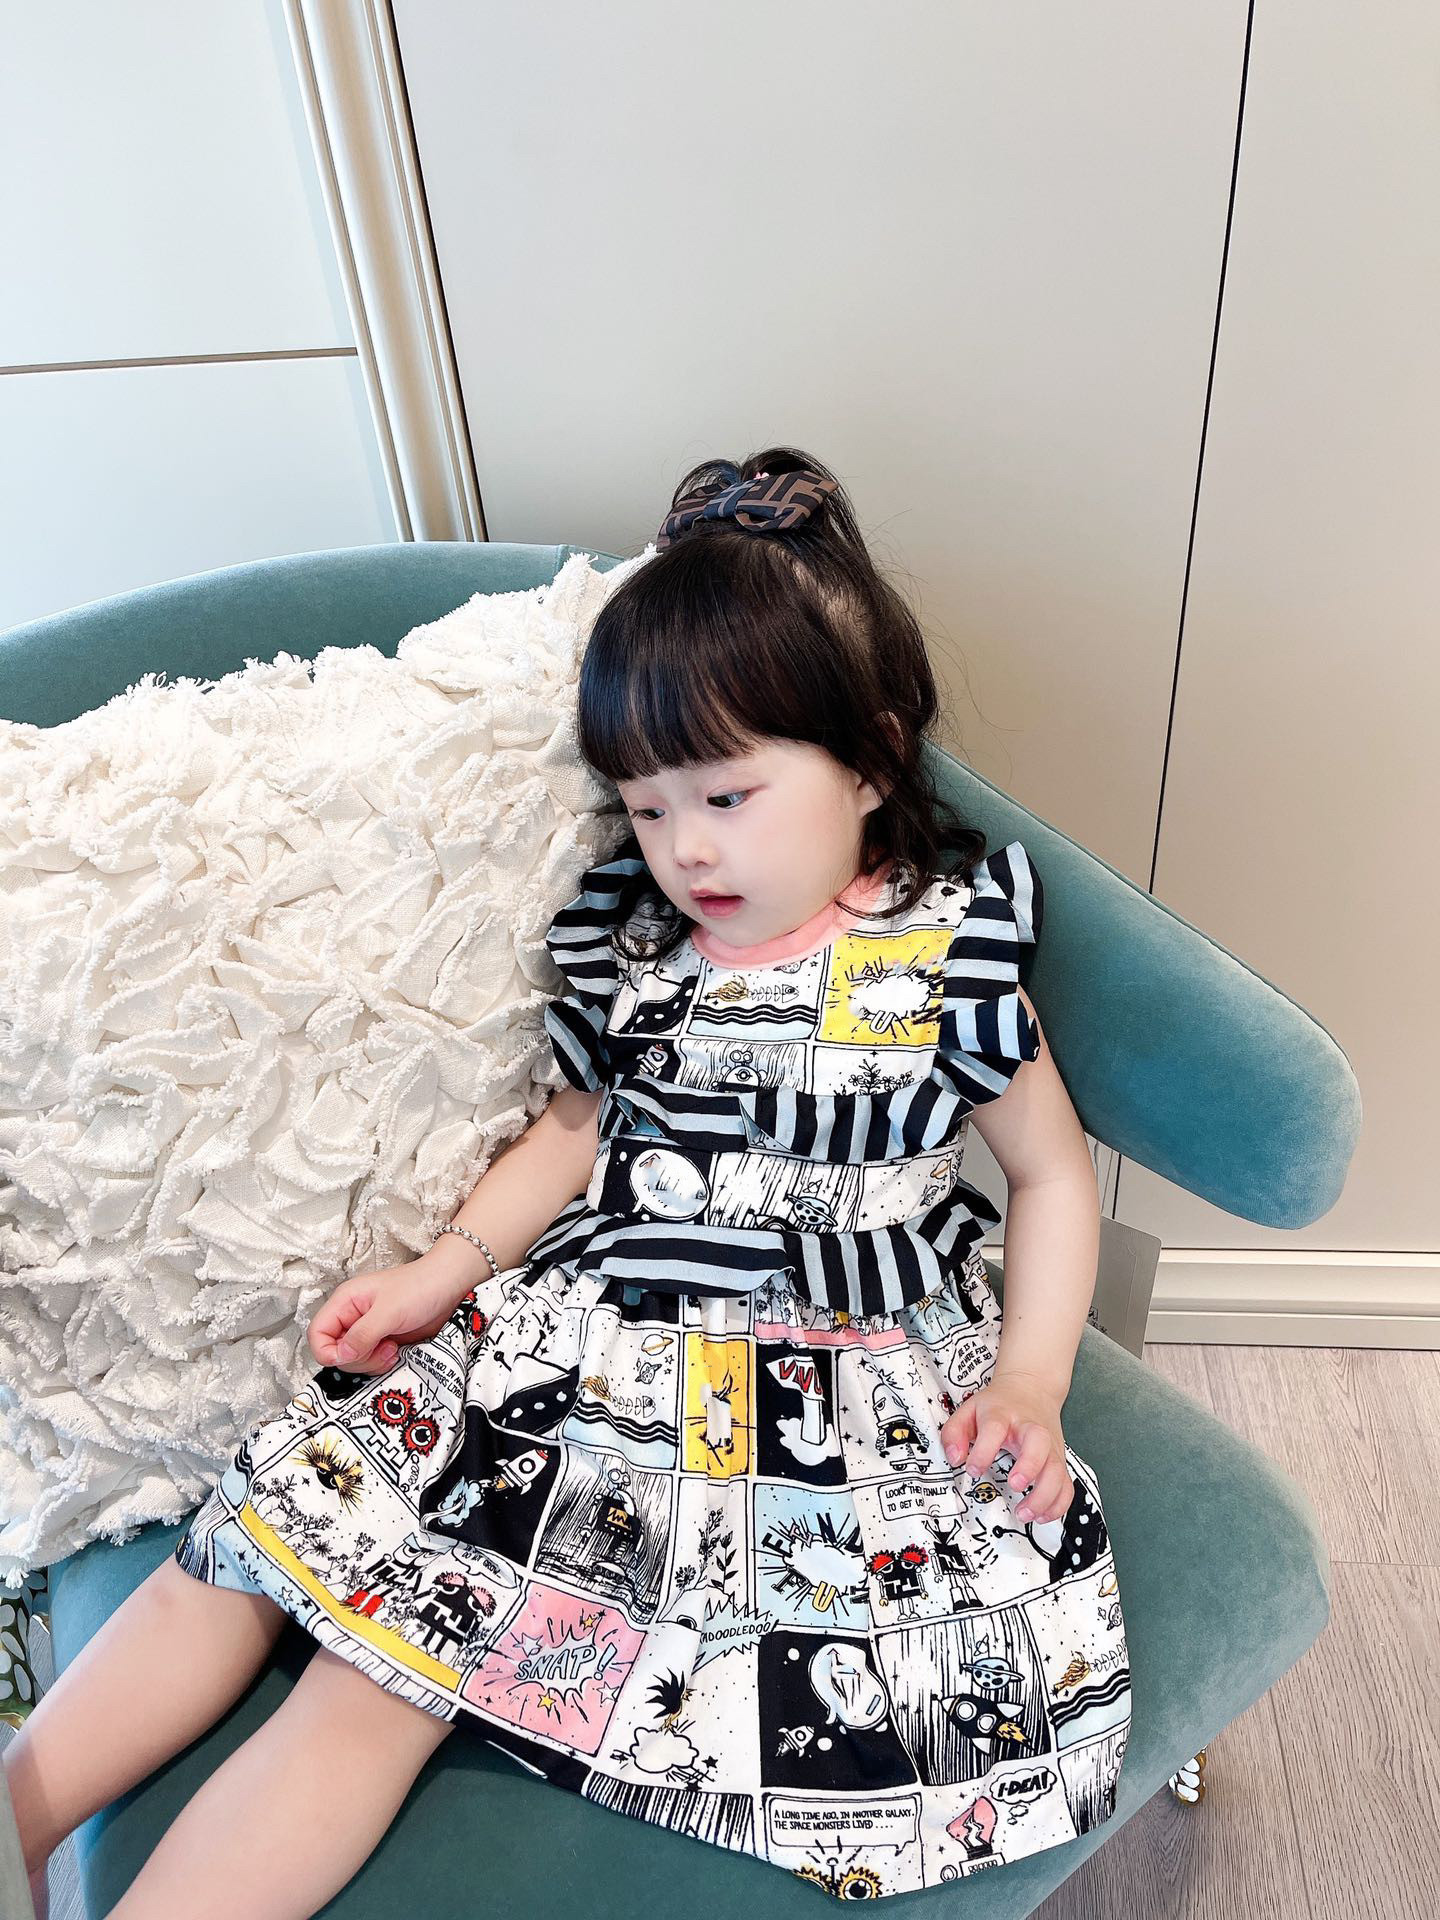 

Children Printed Dresses Summer Kids Girl Printed Dress Baby Girls Petal Sleeve clothes baby party clothing, As show